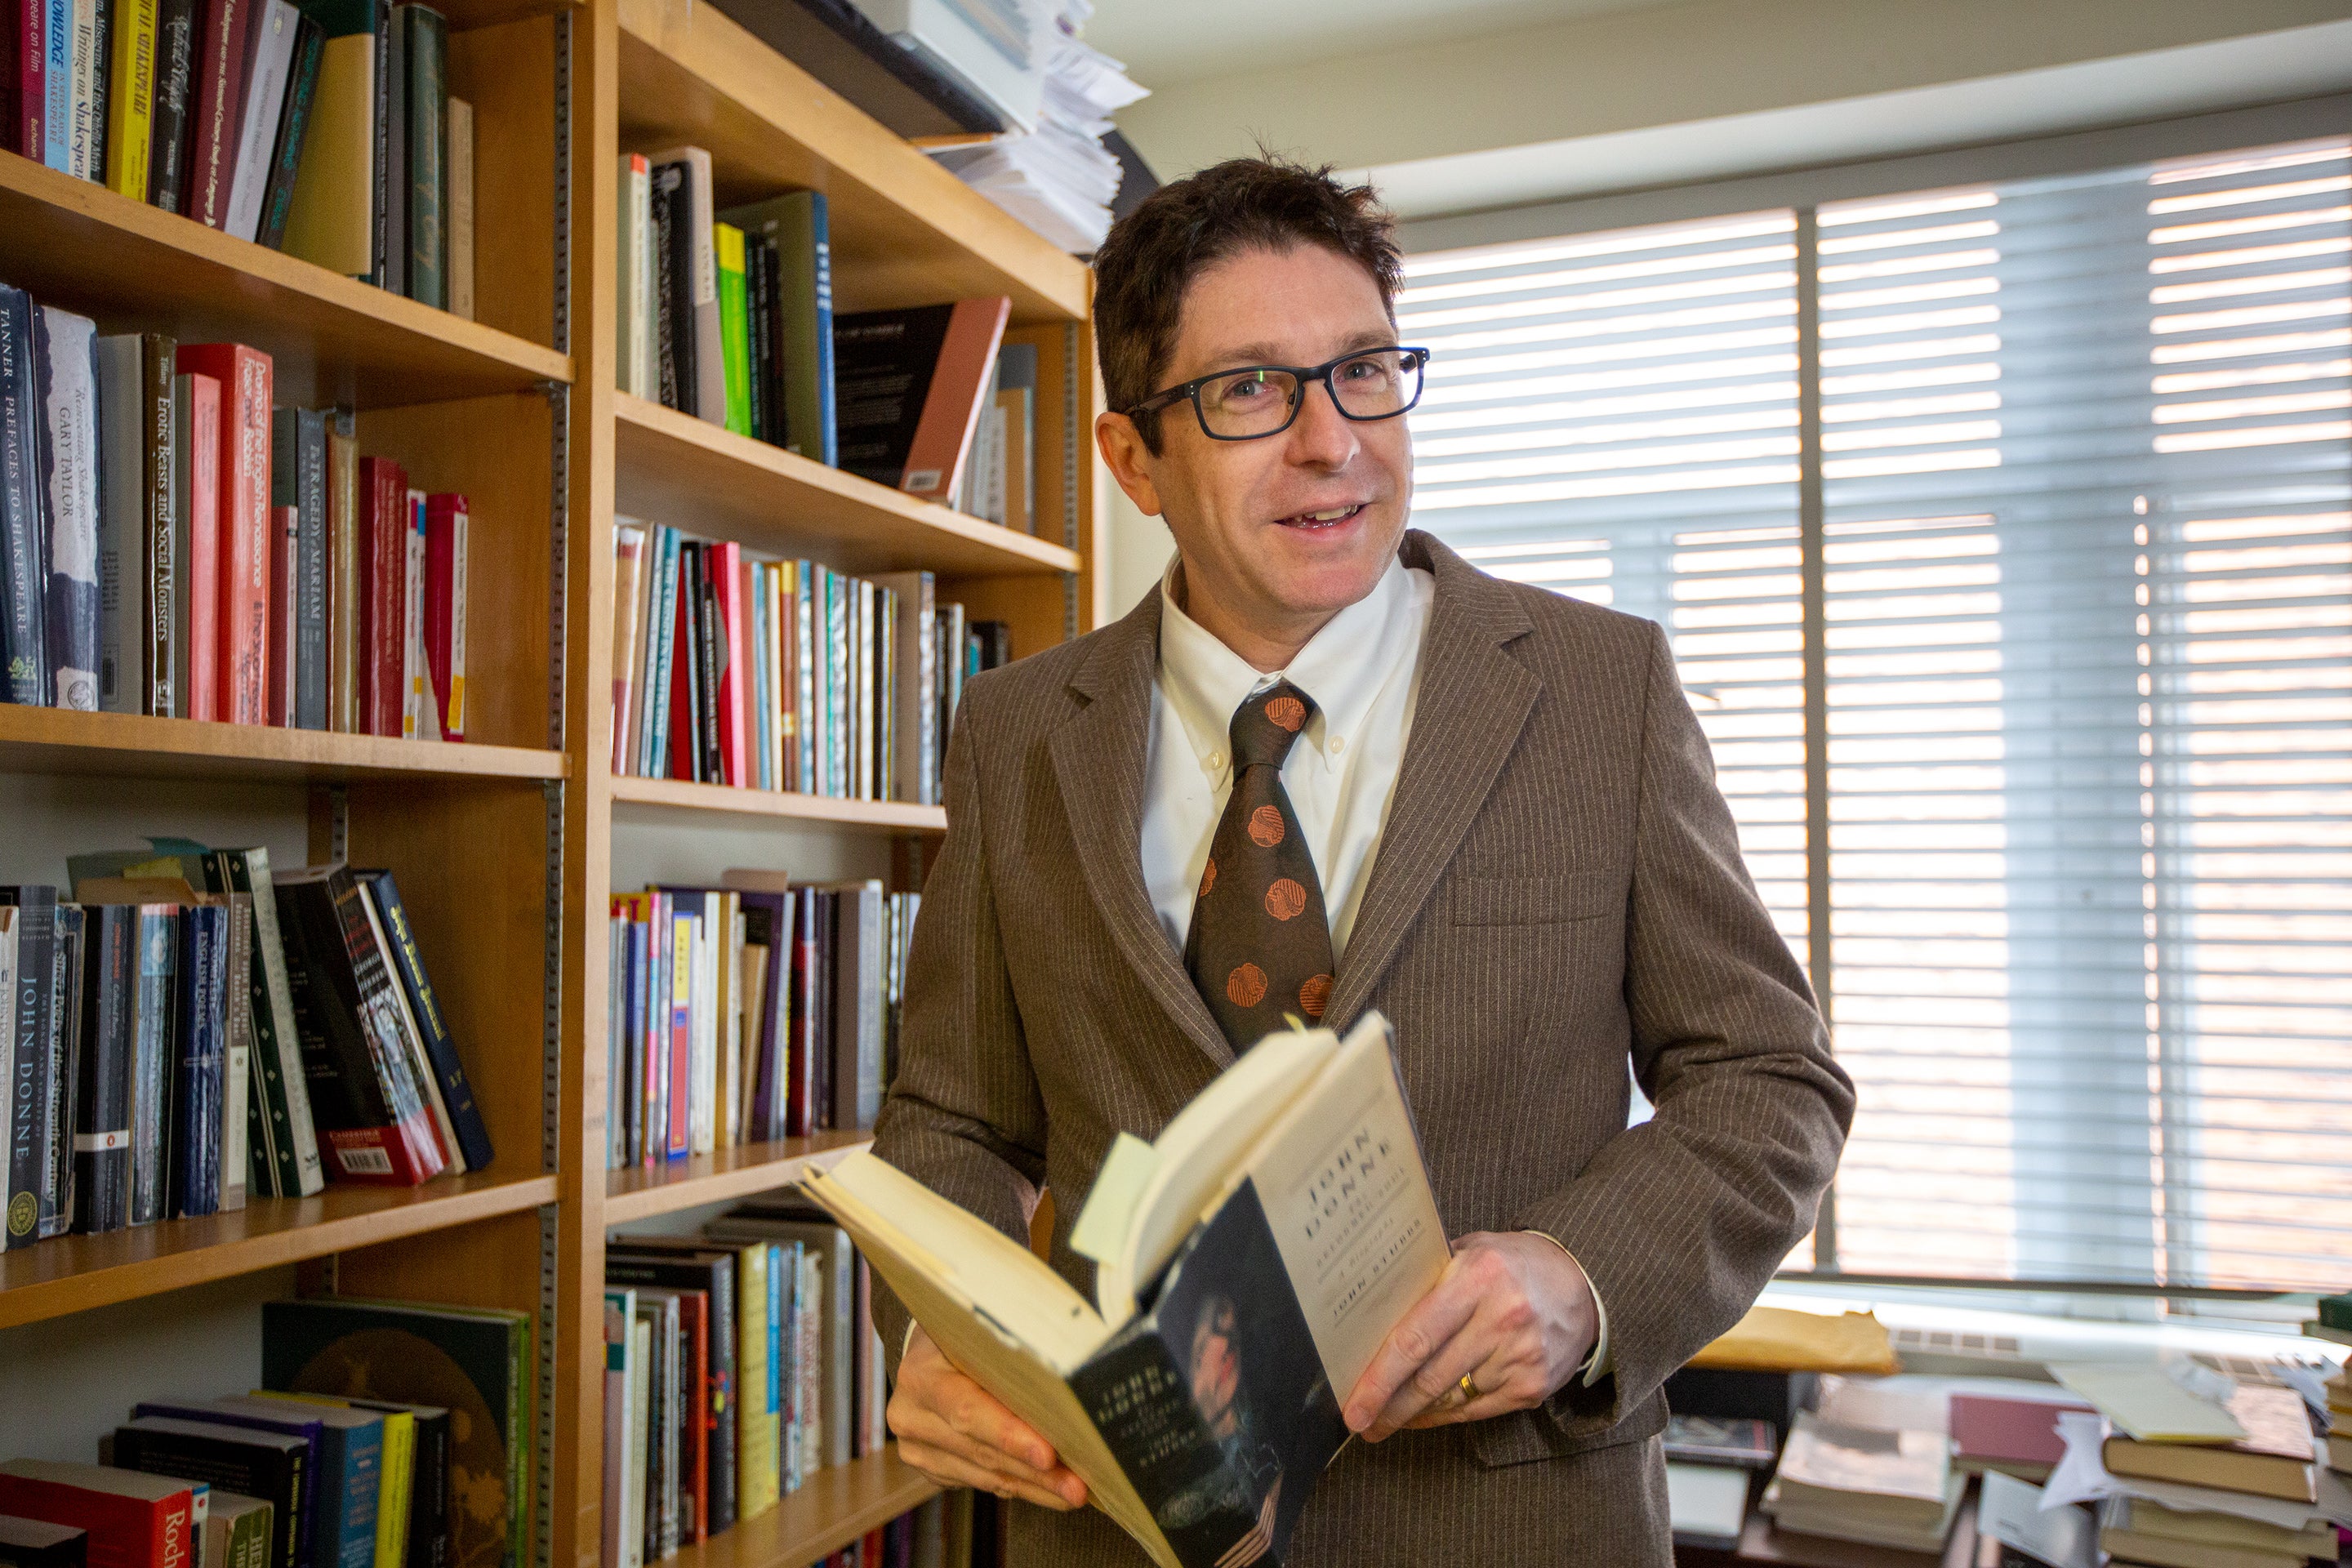 Professor Ben Saunders, standing in front of a bookshelf with a large book open in his hands